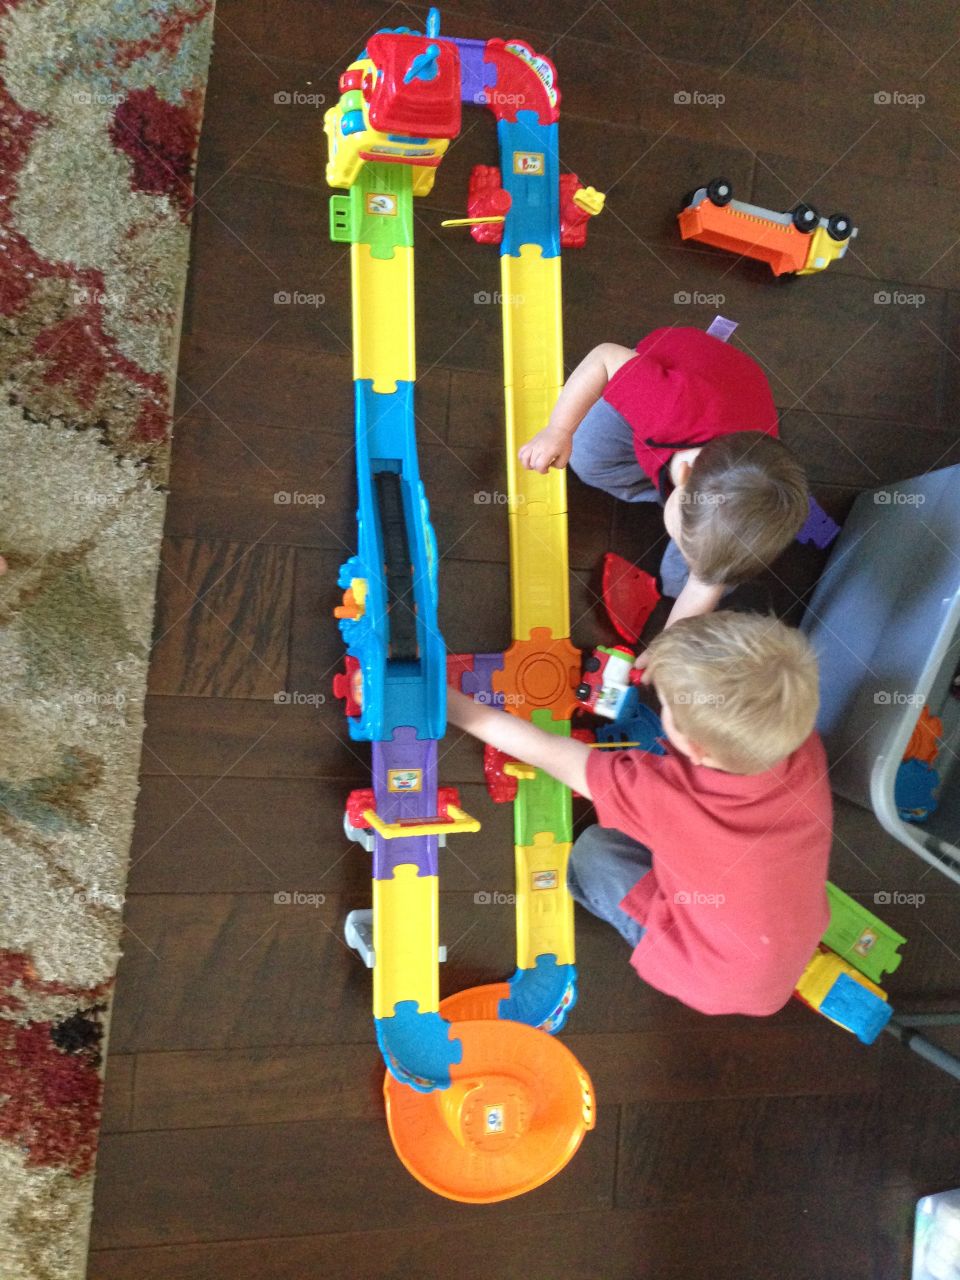 Play time. Playing with trains